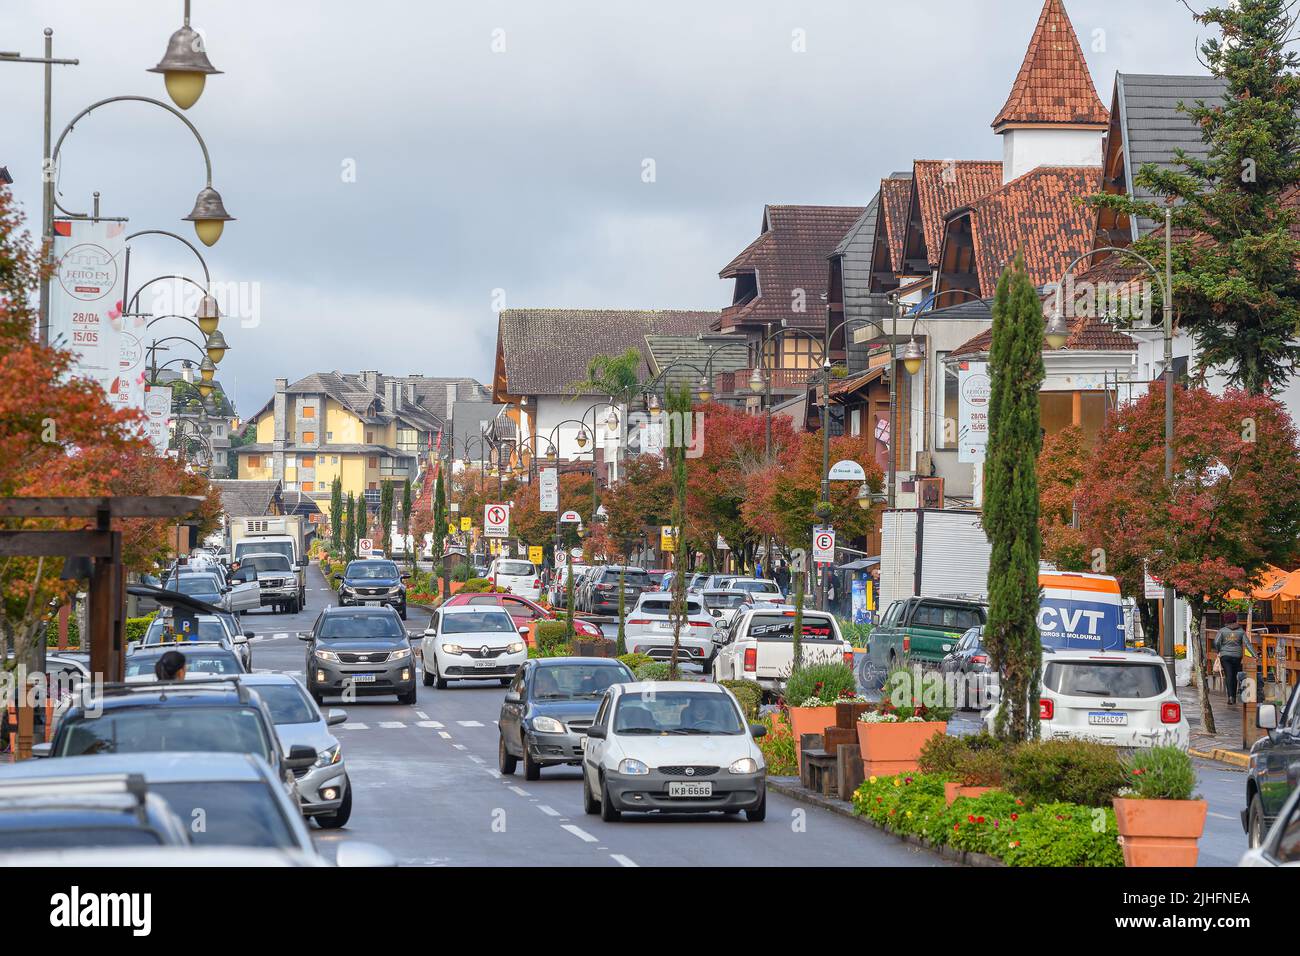 Gramado, RS, Brazil - May 19, 2022: view of the traffic and architecture around Borges de Medeiros avenue on a cloudy day of autumn. Downtown of Grama Stock Photo